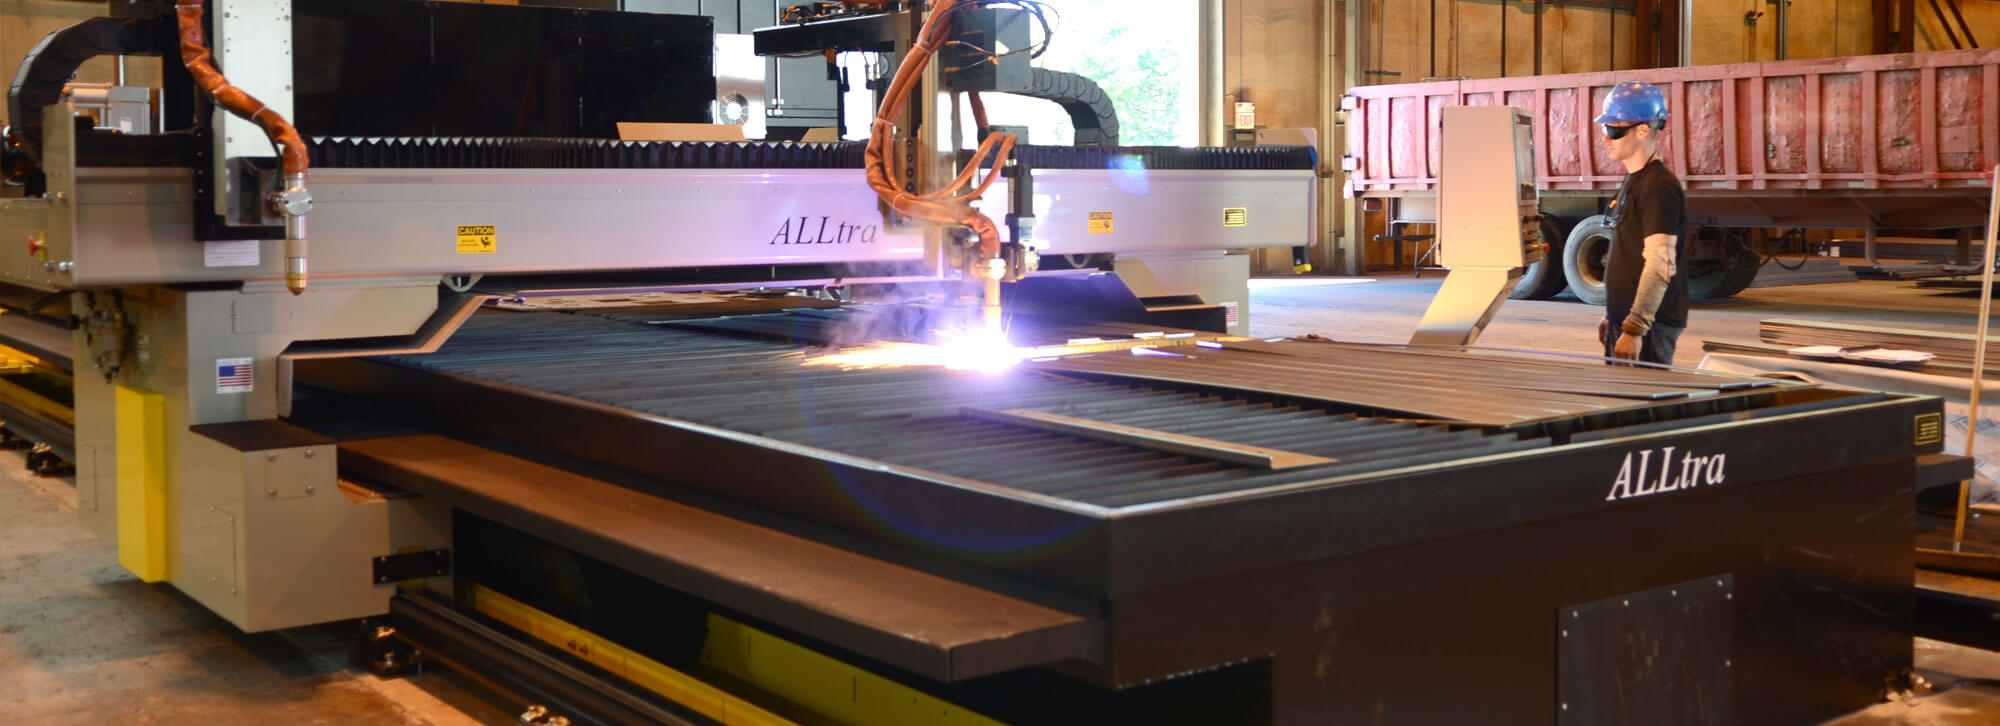 Fabricator at Millwood Metalworks using the ALLtra 400 Plasma and Flame cutter to form custom metal parts